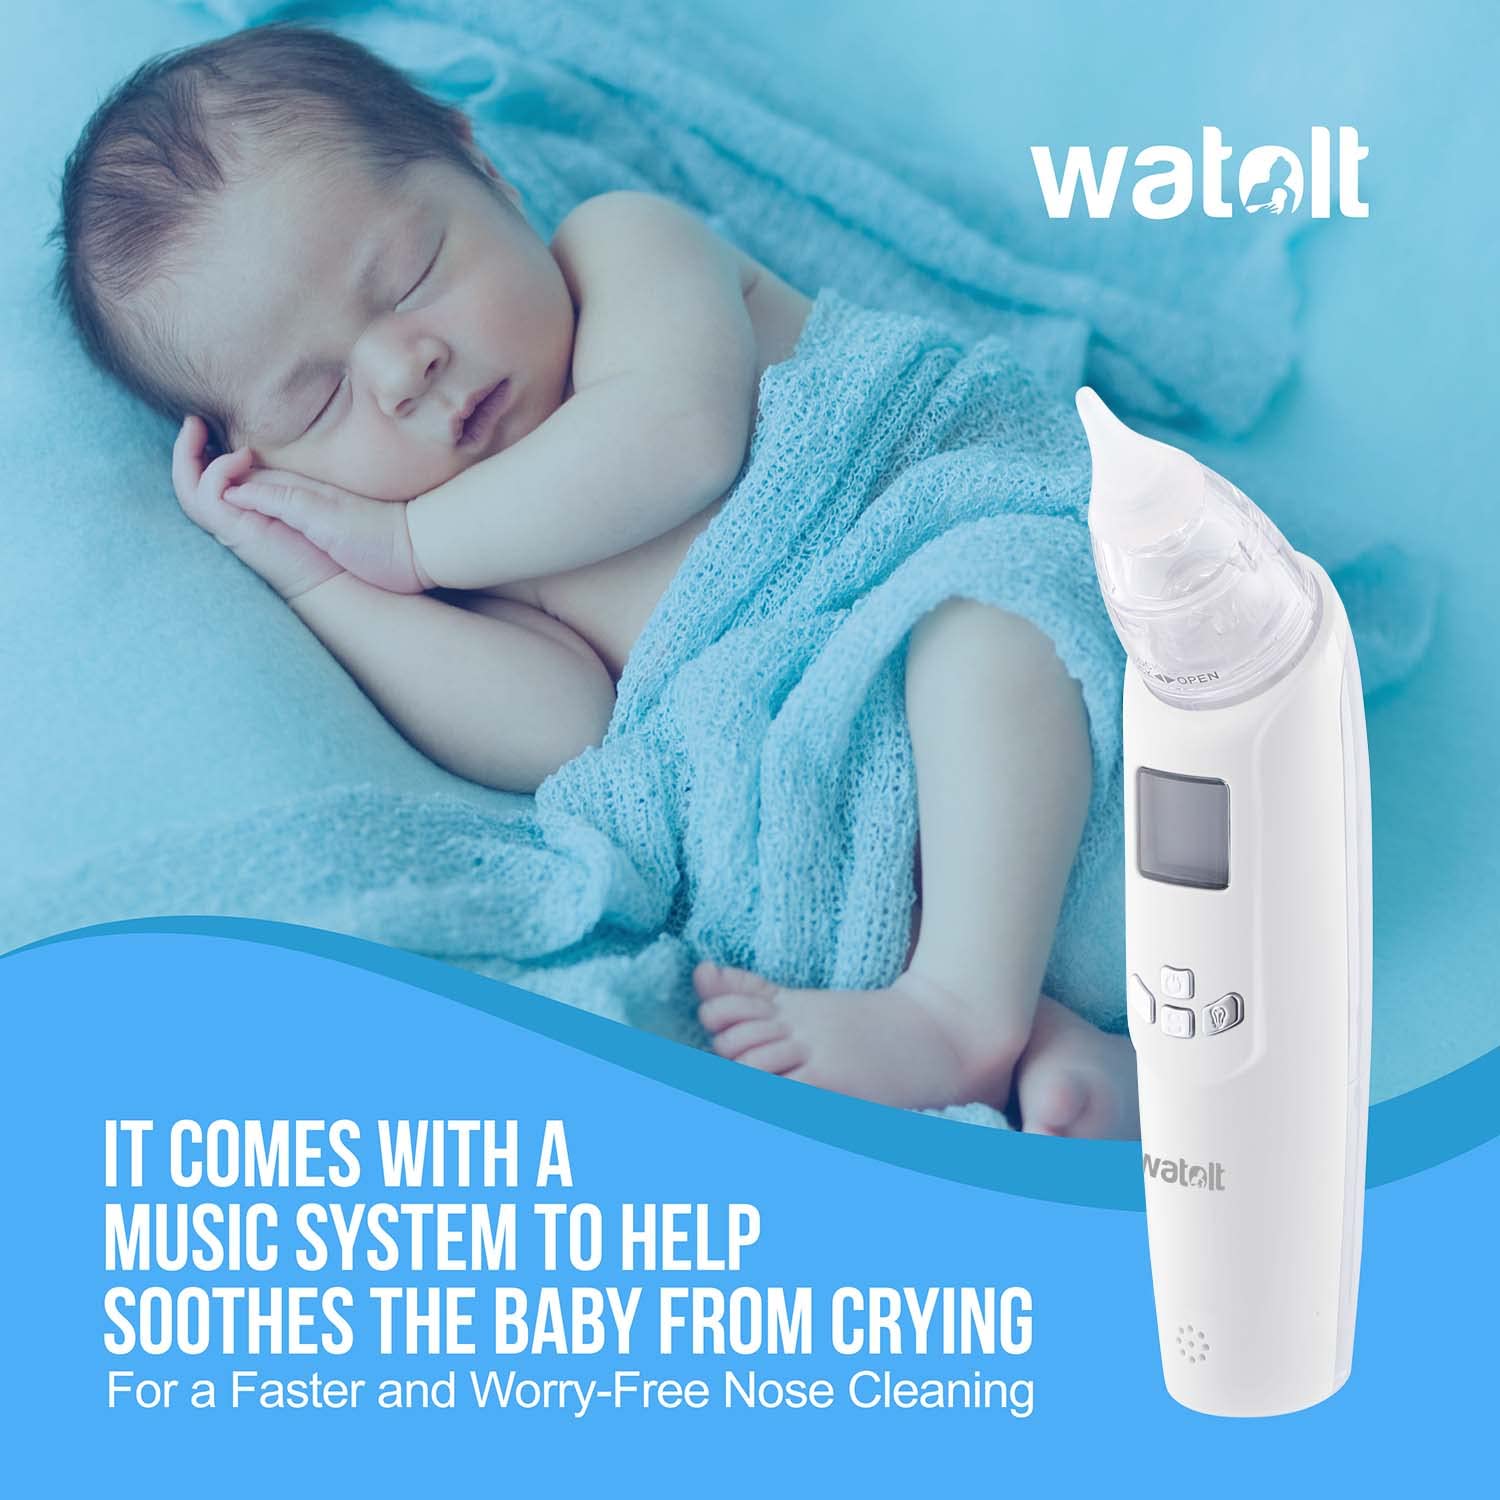 Watolt Baby Nasal Aspirator - Electric Nose Suction for Baby - Automatic Booger Sucker for Infants - Battery Powered Snot Mucus Remover for Kids Toddlers